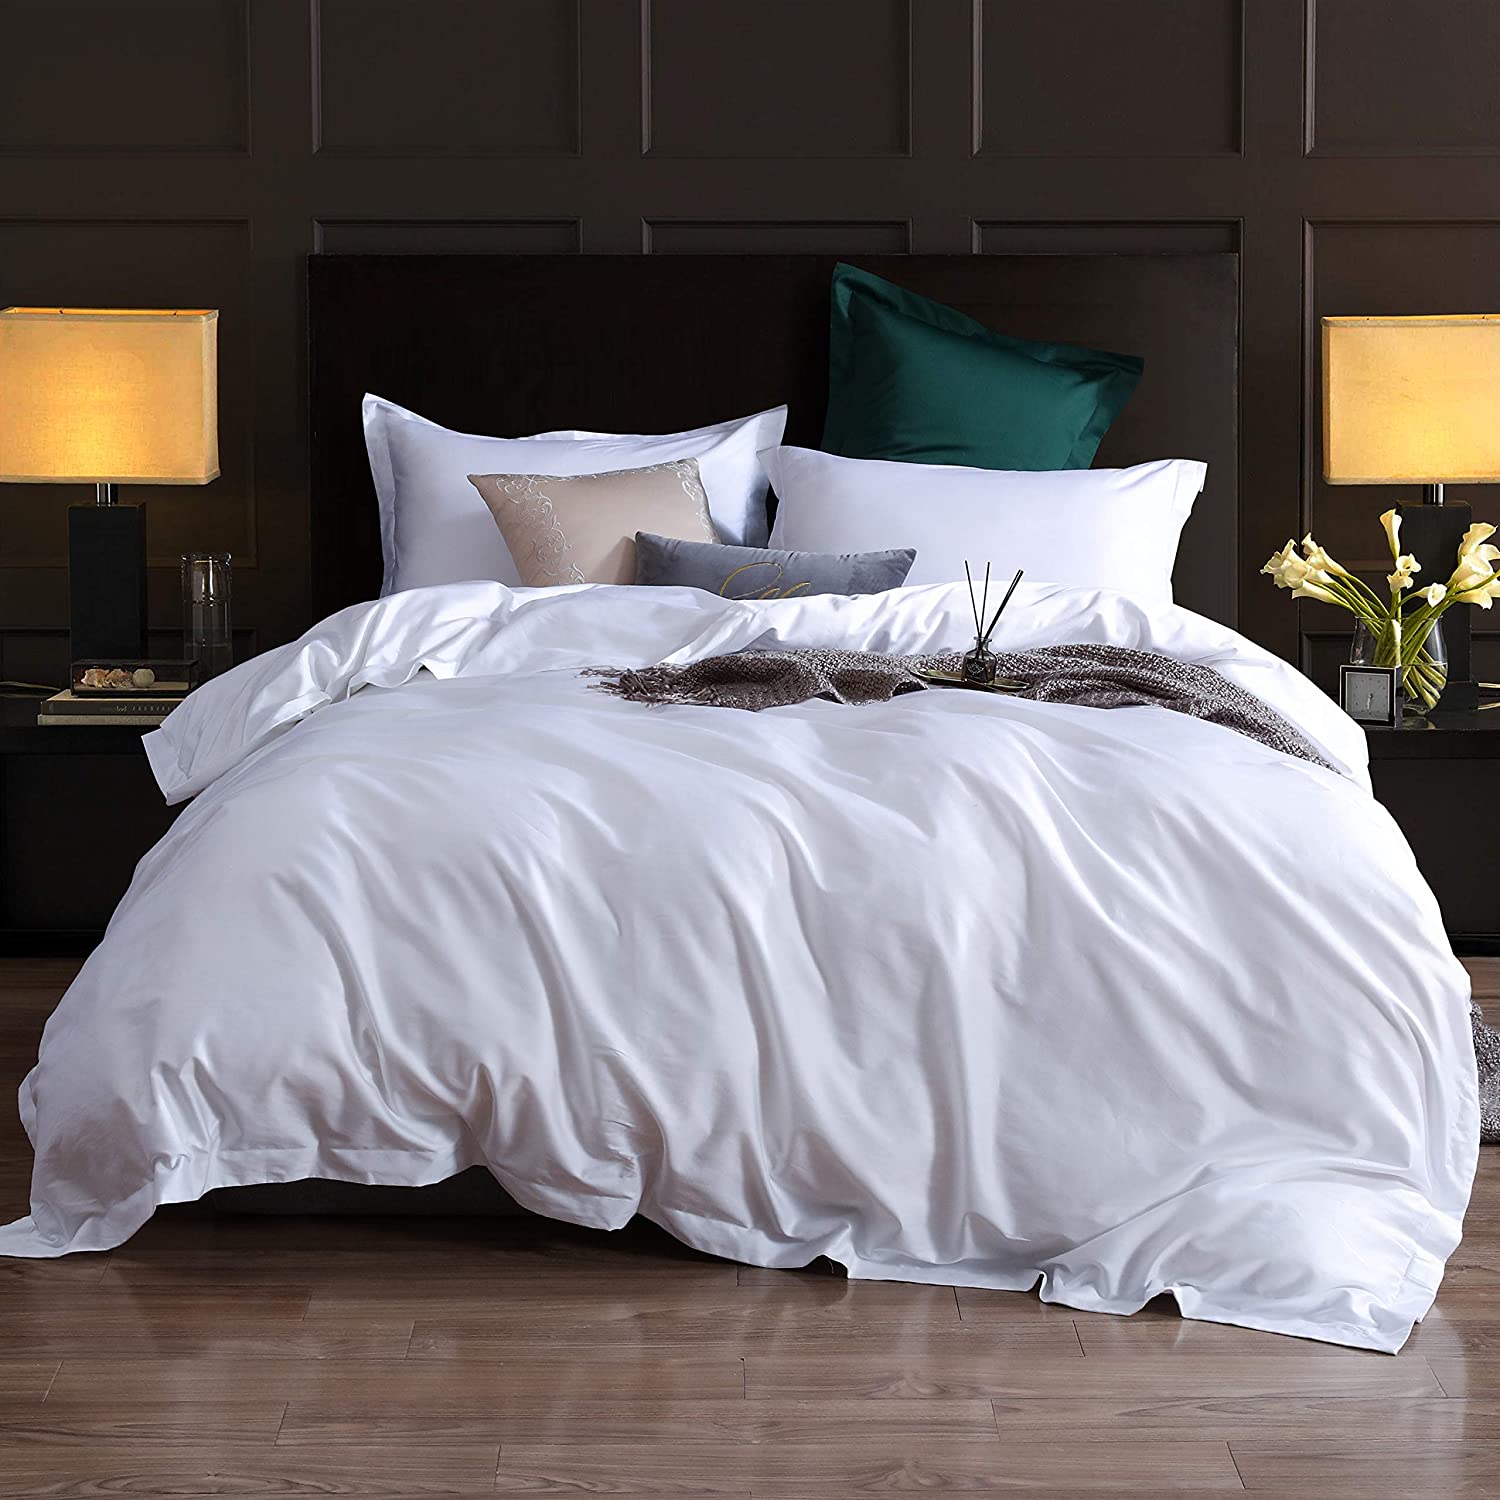 Price:$169.99  Cover Set King,3 Piece Bedding Sets 100% Egyptian Cotton 1200 Thread Count 1 Comforter Cover and 2 Pillow Cases,White-106x90Inches : Home & Kitchen